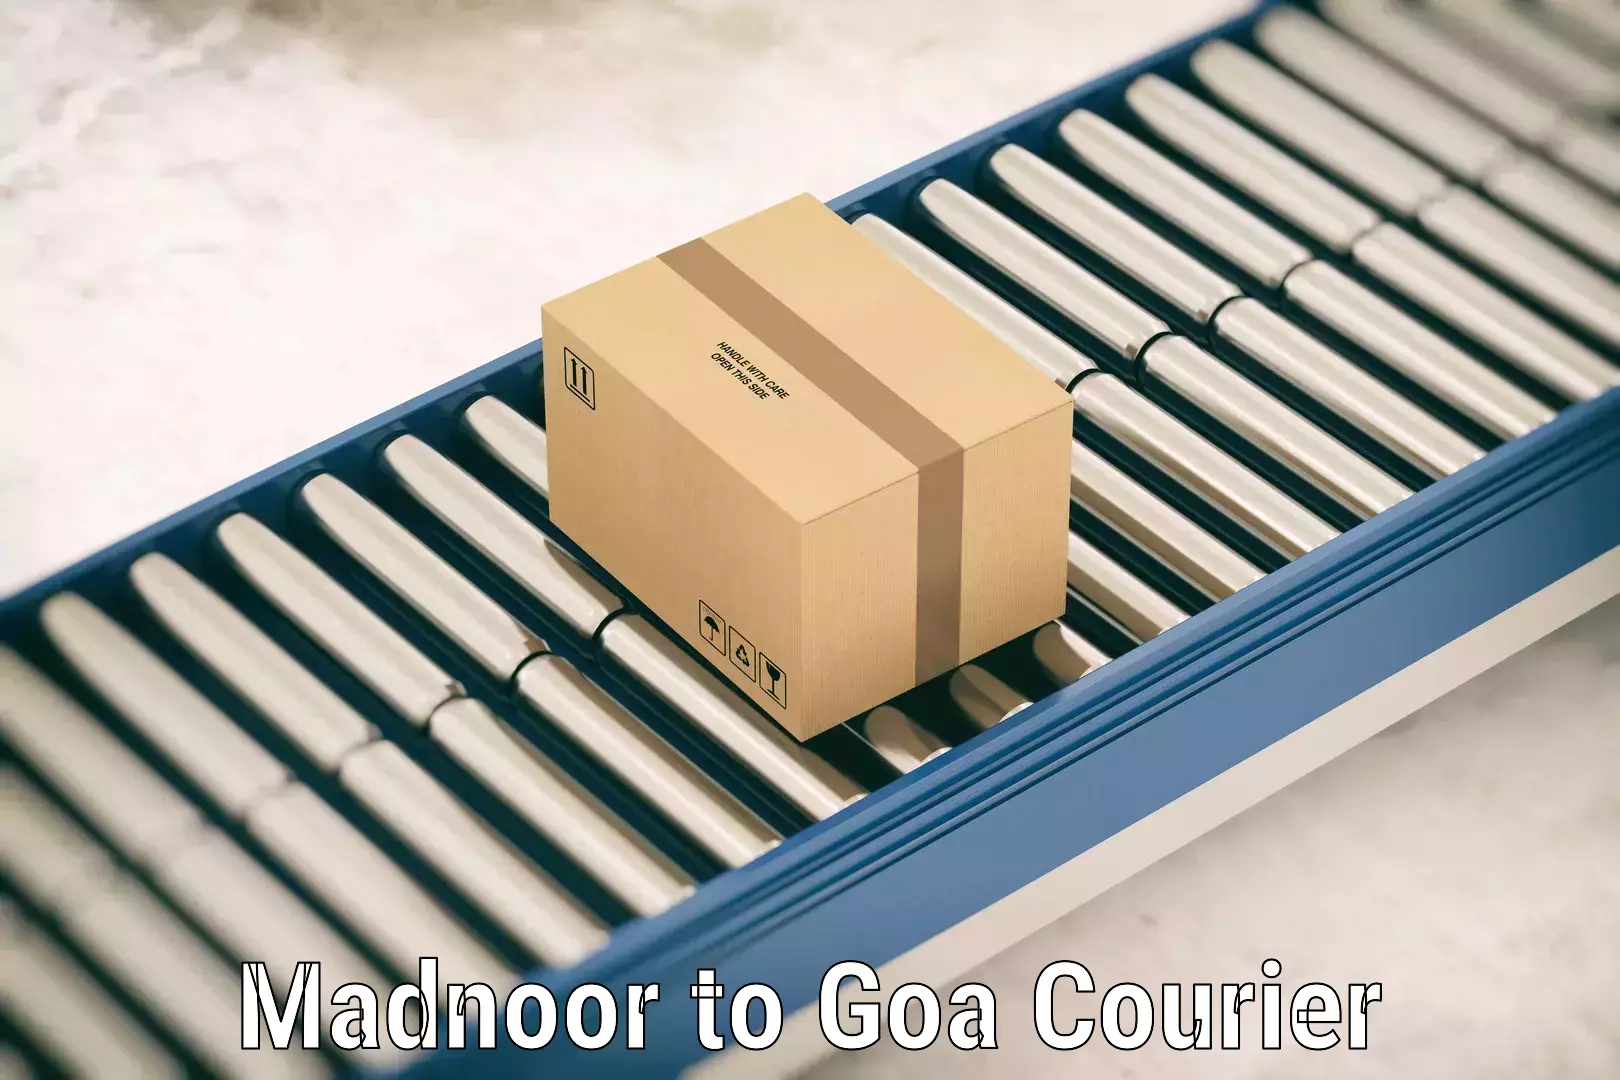 Luggage transport service Madnoor to Goa